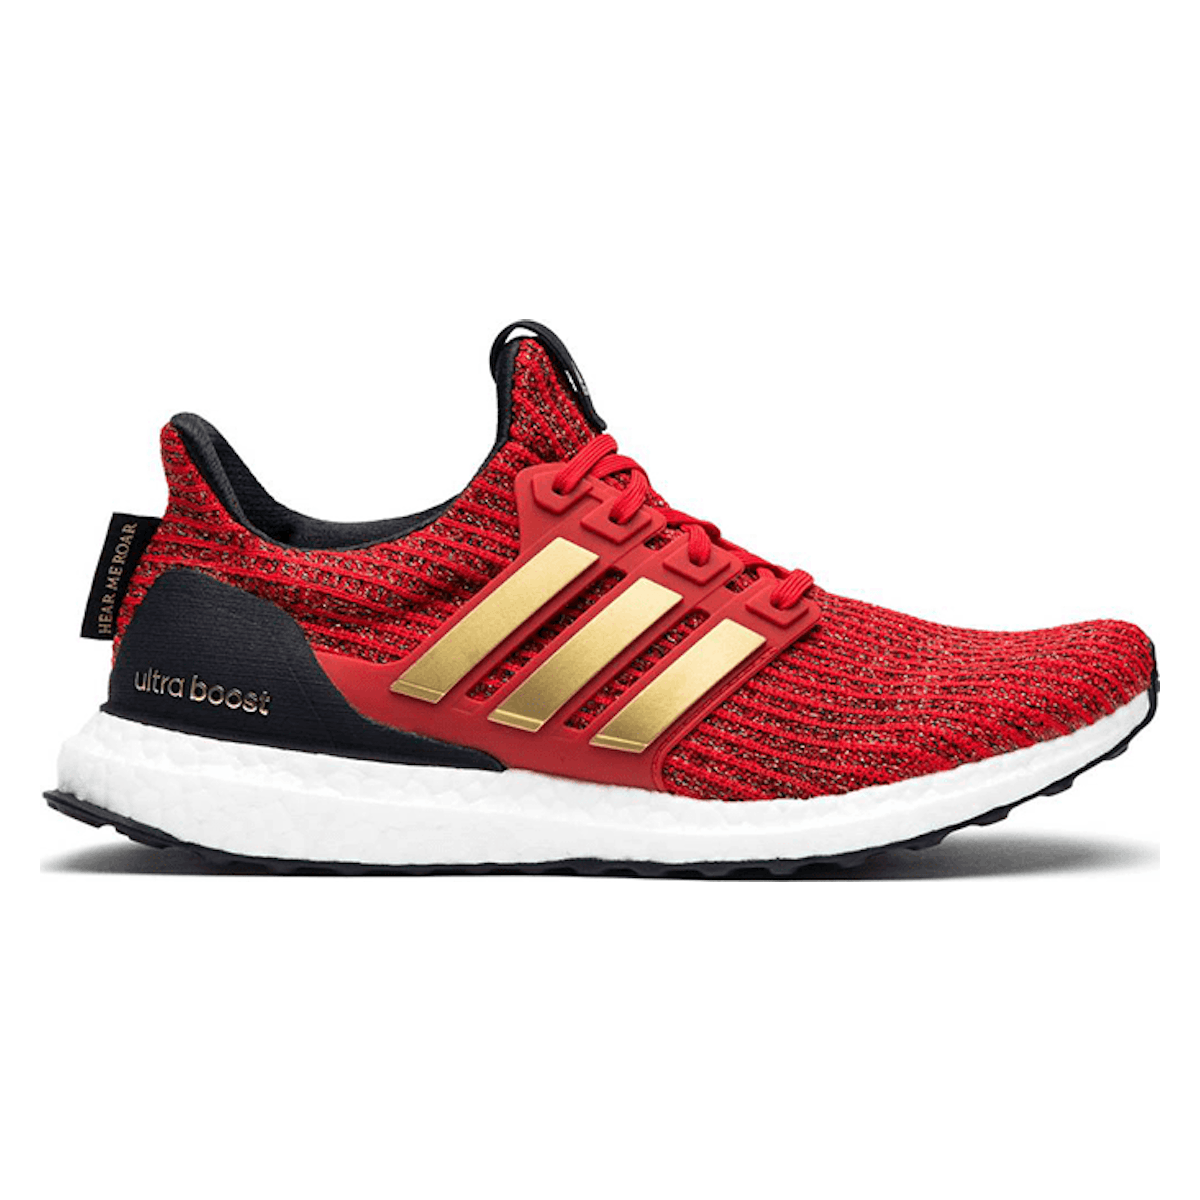 Game Of Thrones x Adidas Wmns UltraBoost 4.0 "House Lannister"